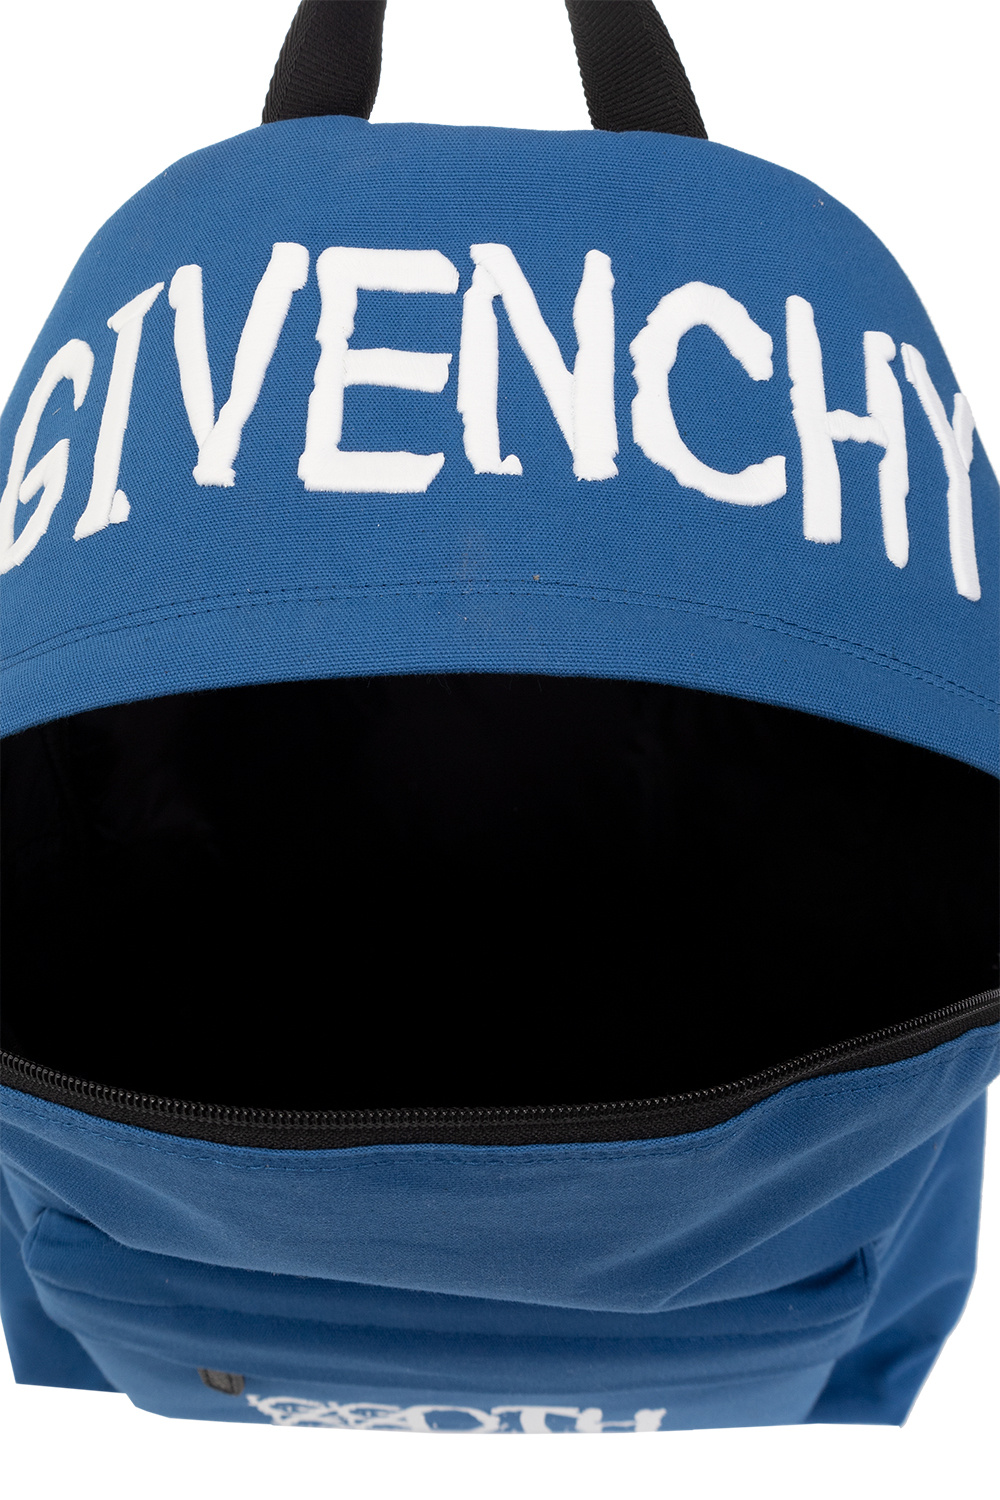 givenchy stampa givenchy stampa x Josh Smith